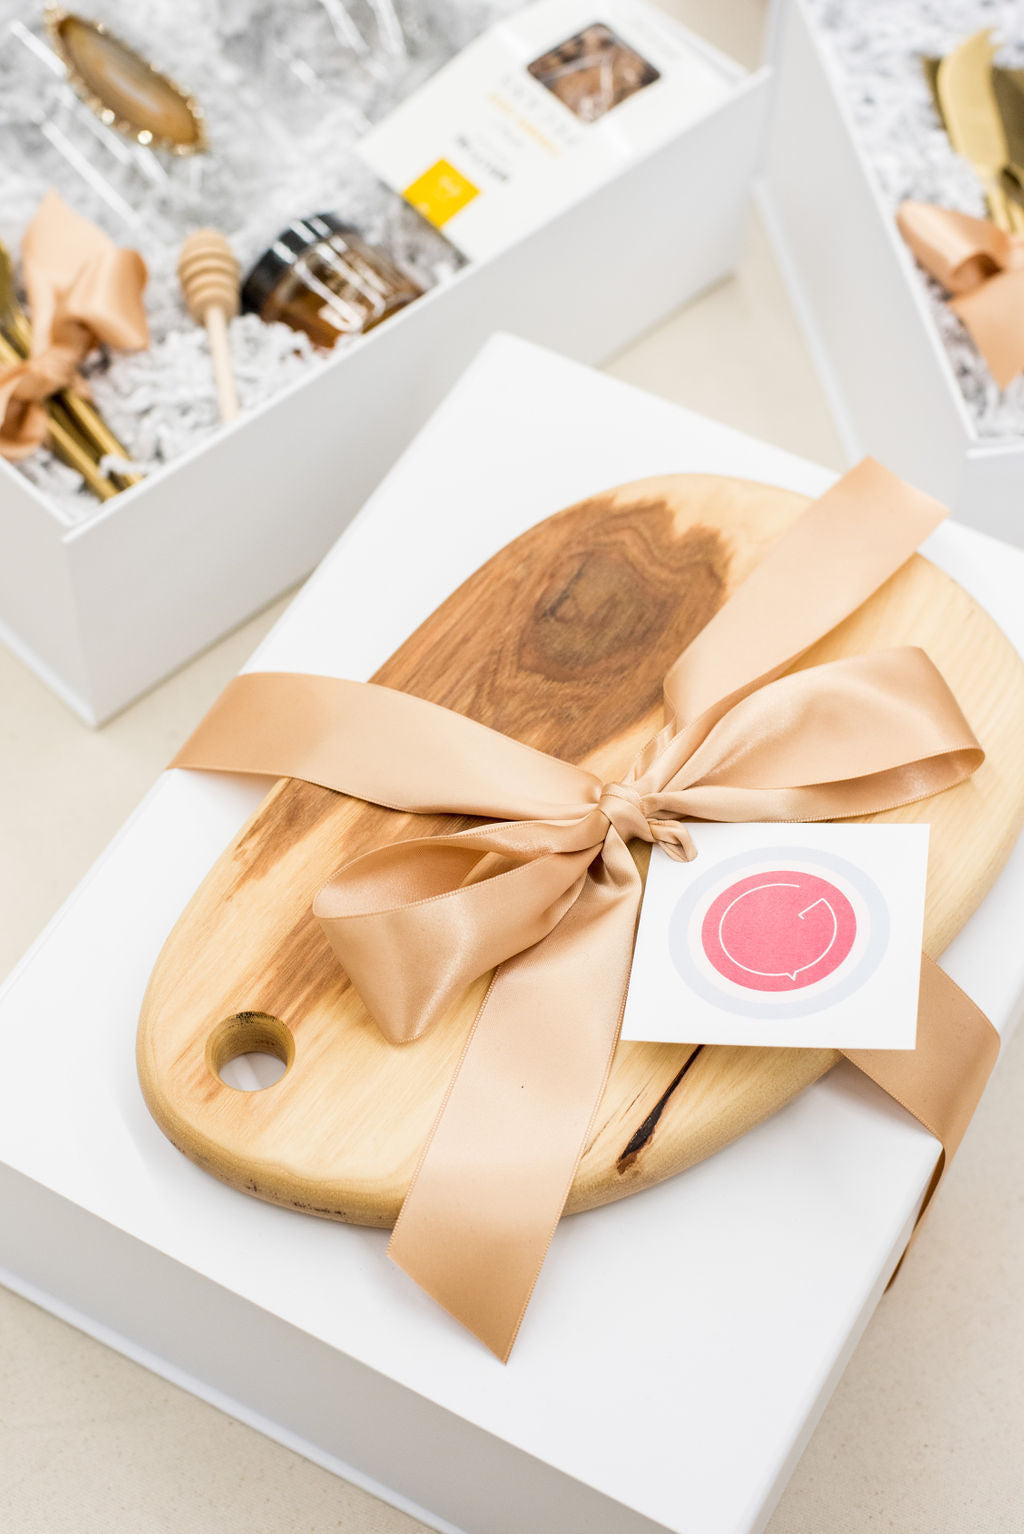 PR firm's corporate holiday client gift boxes by Marigold & Grey